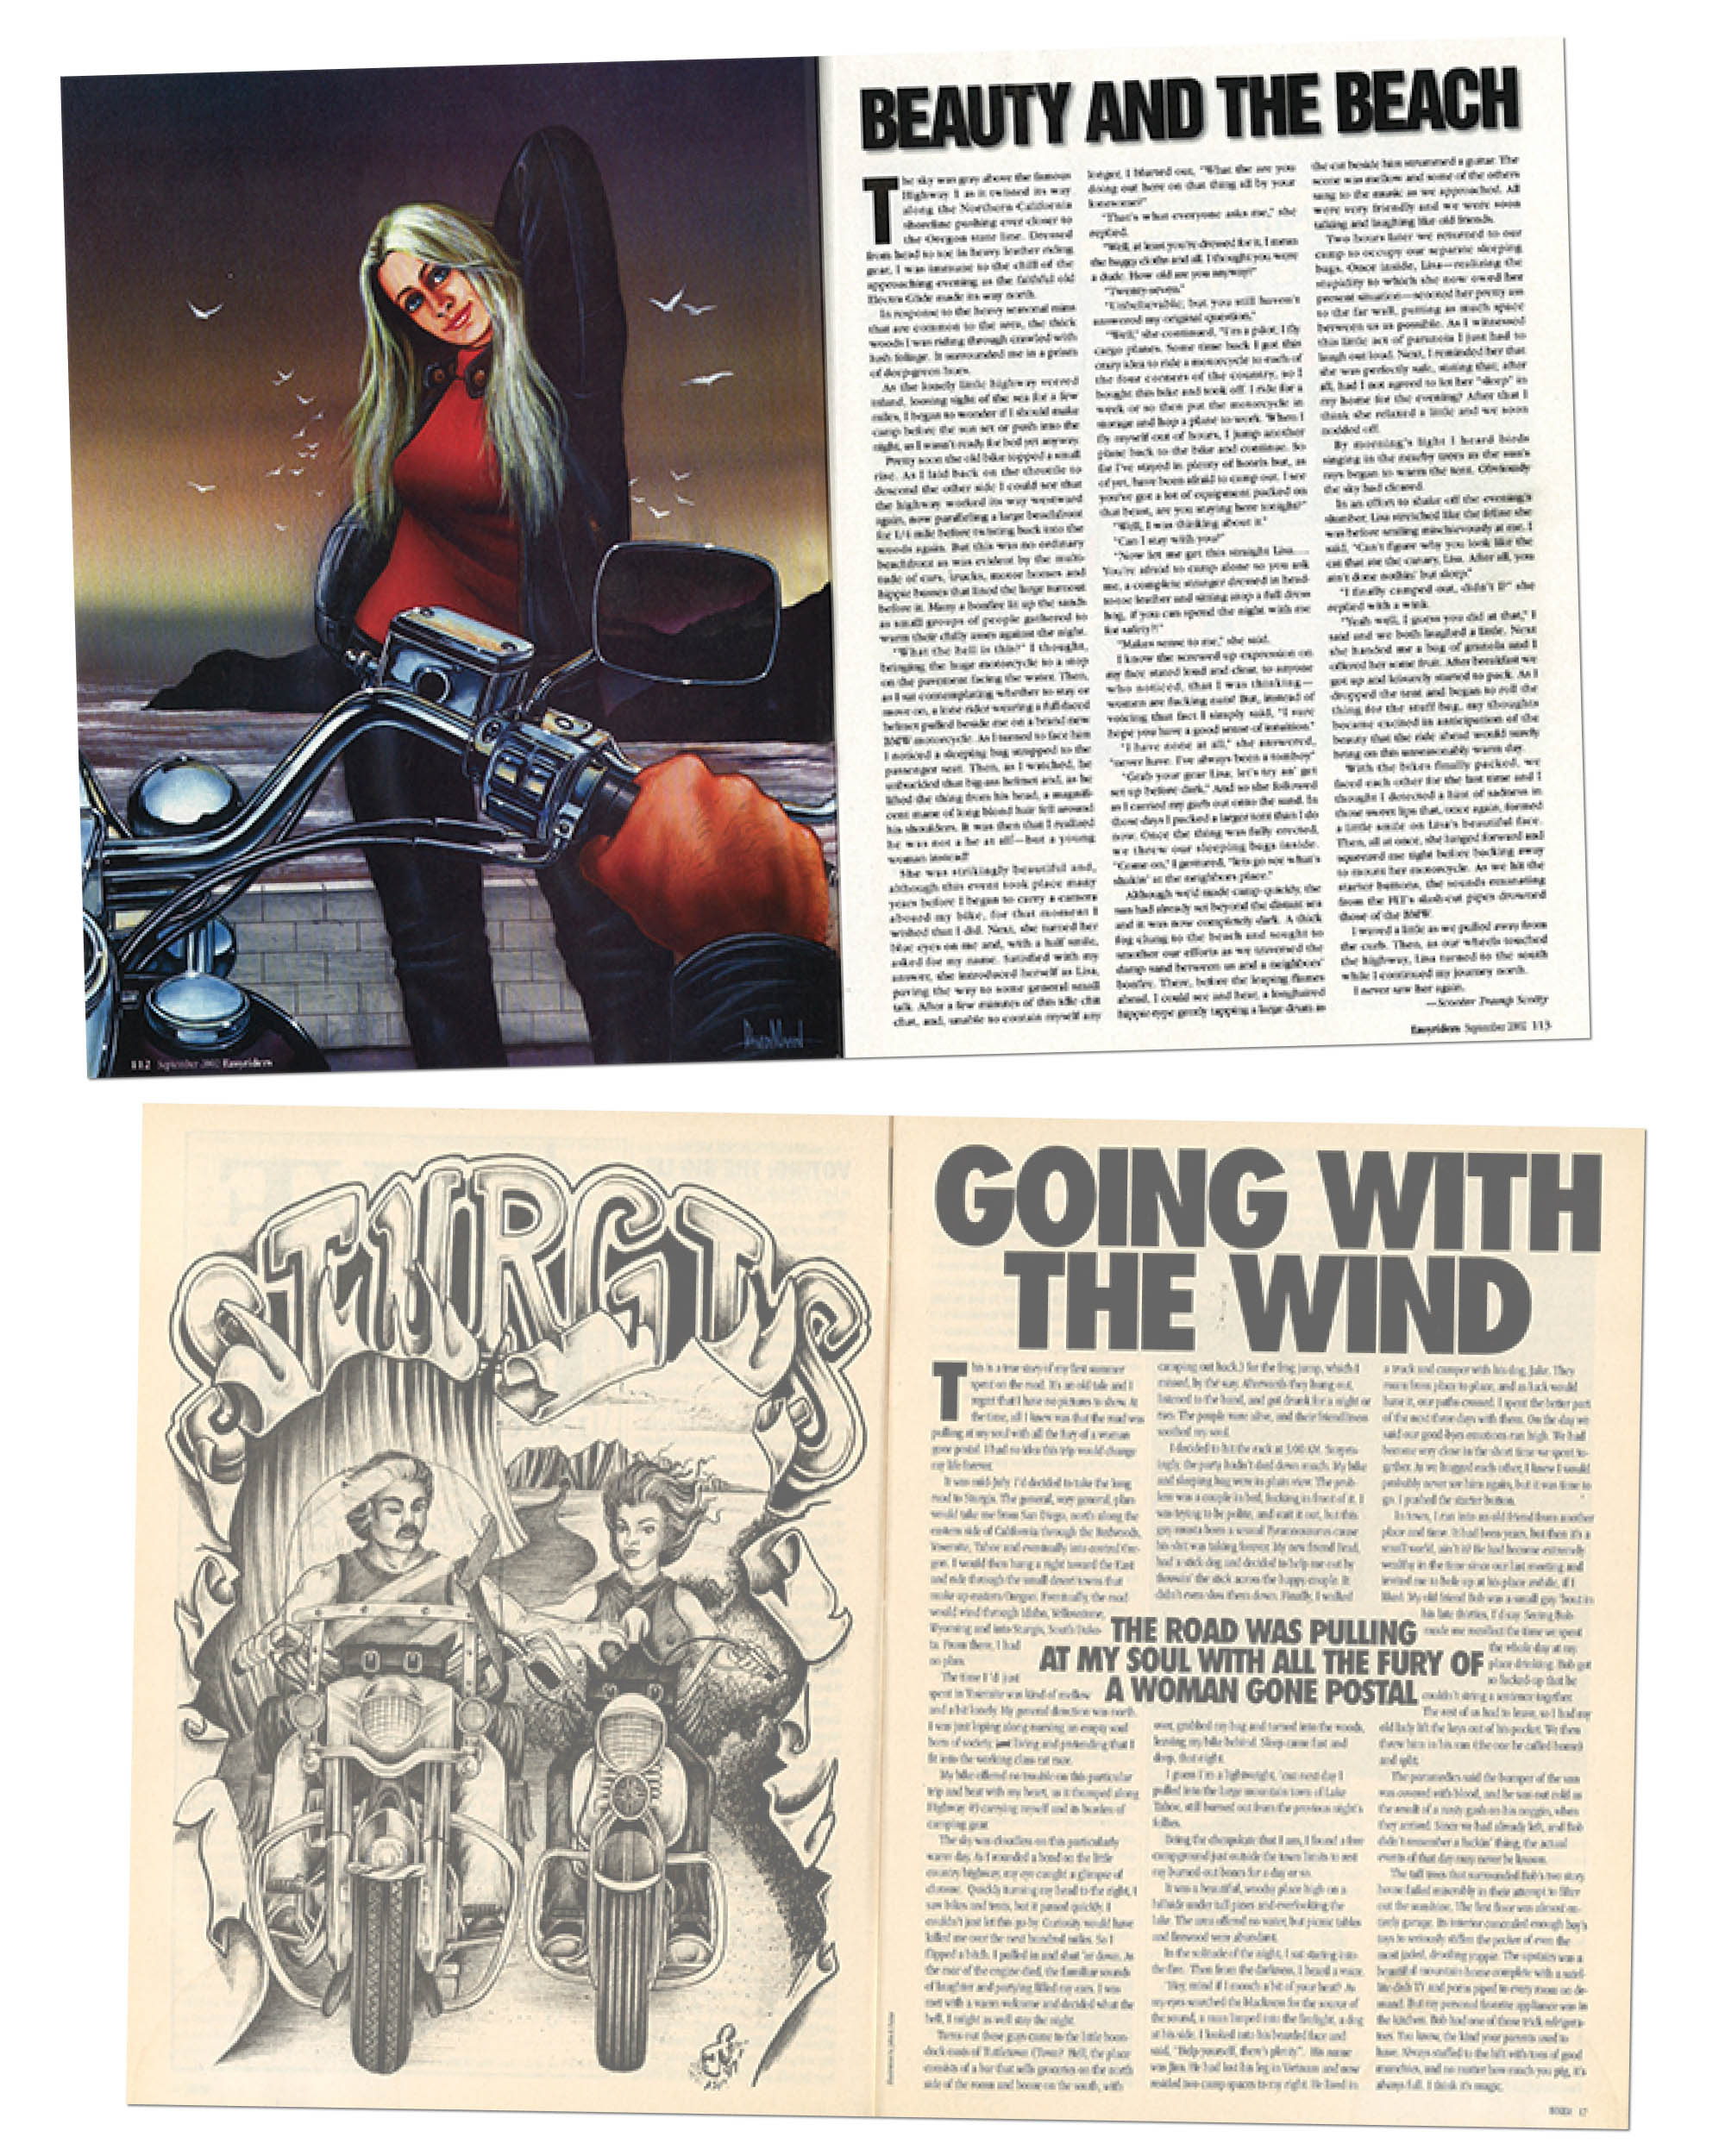 A selection of Scotty's Easyrider articles with artwork by David Mann.